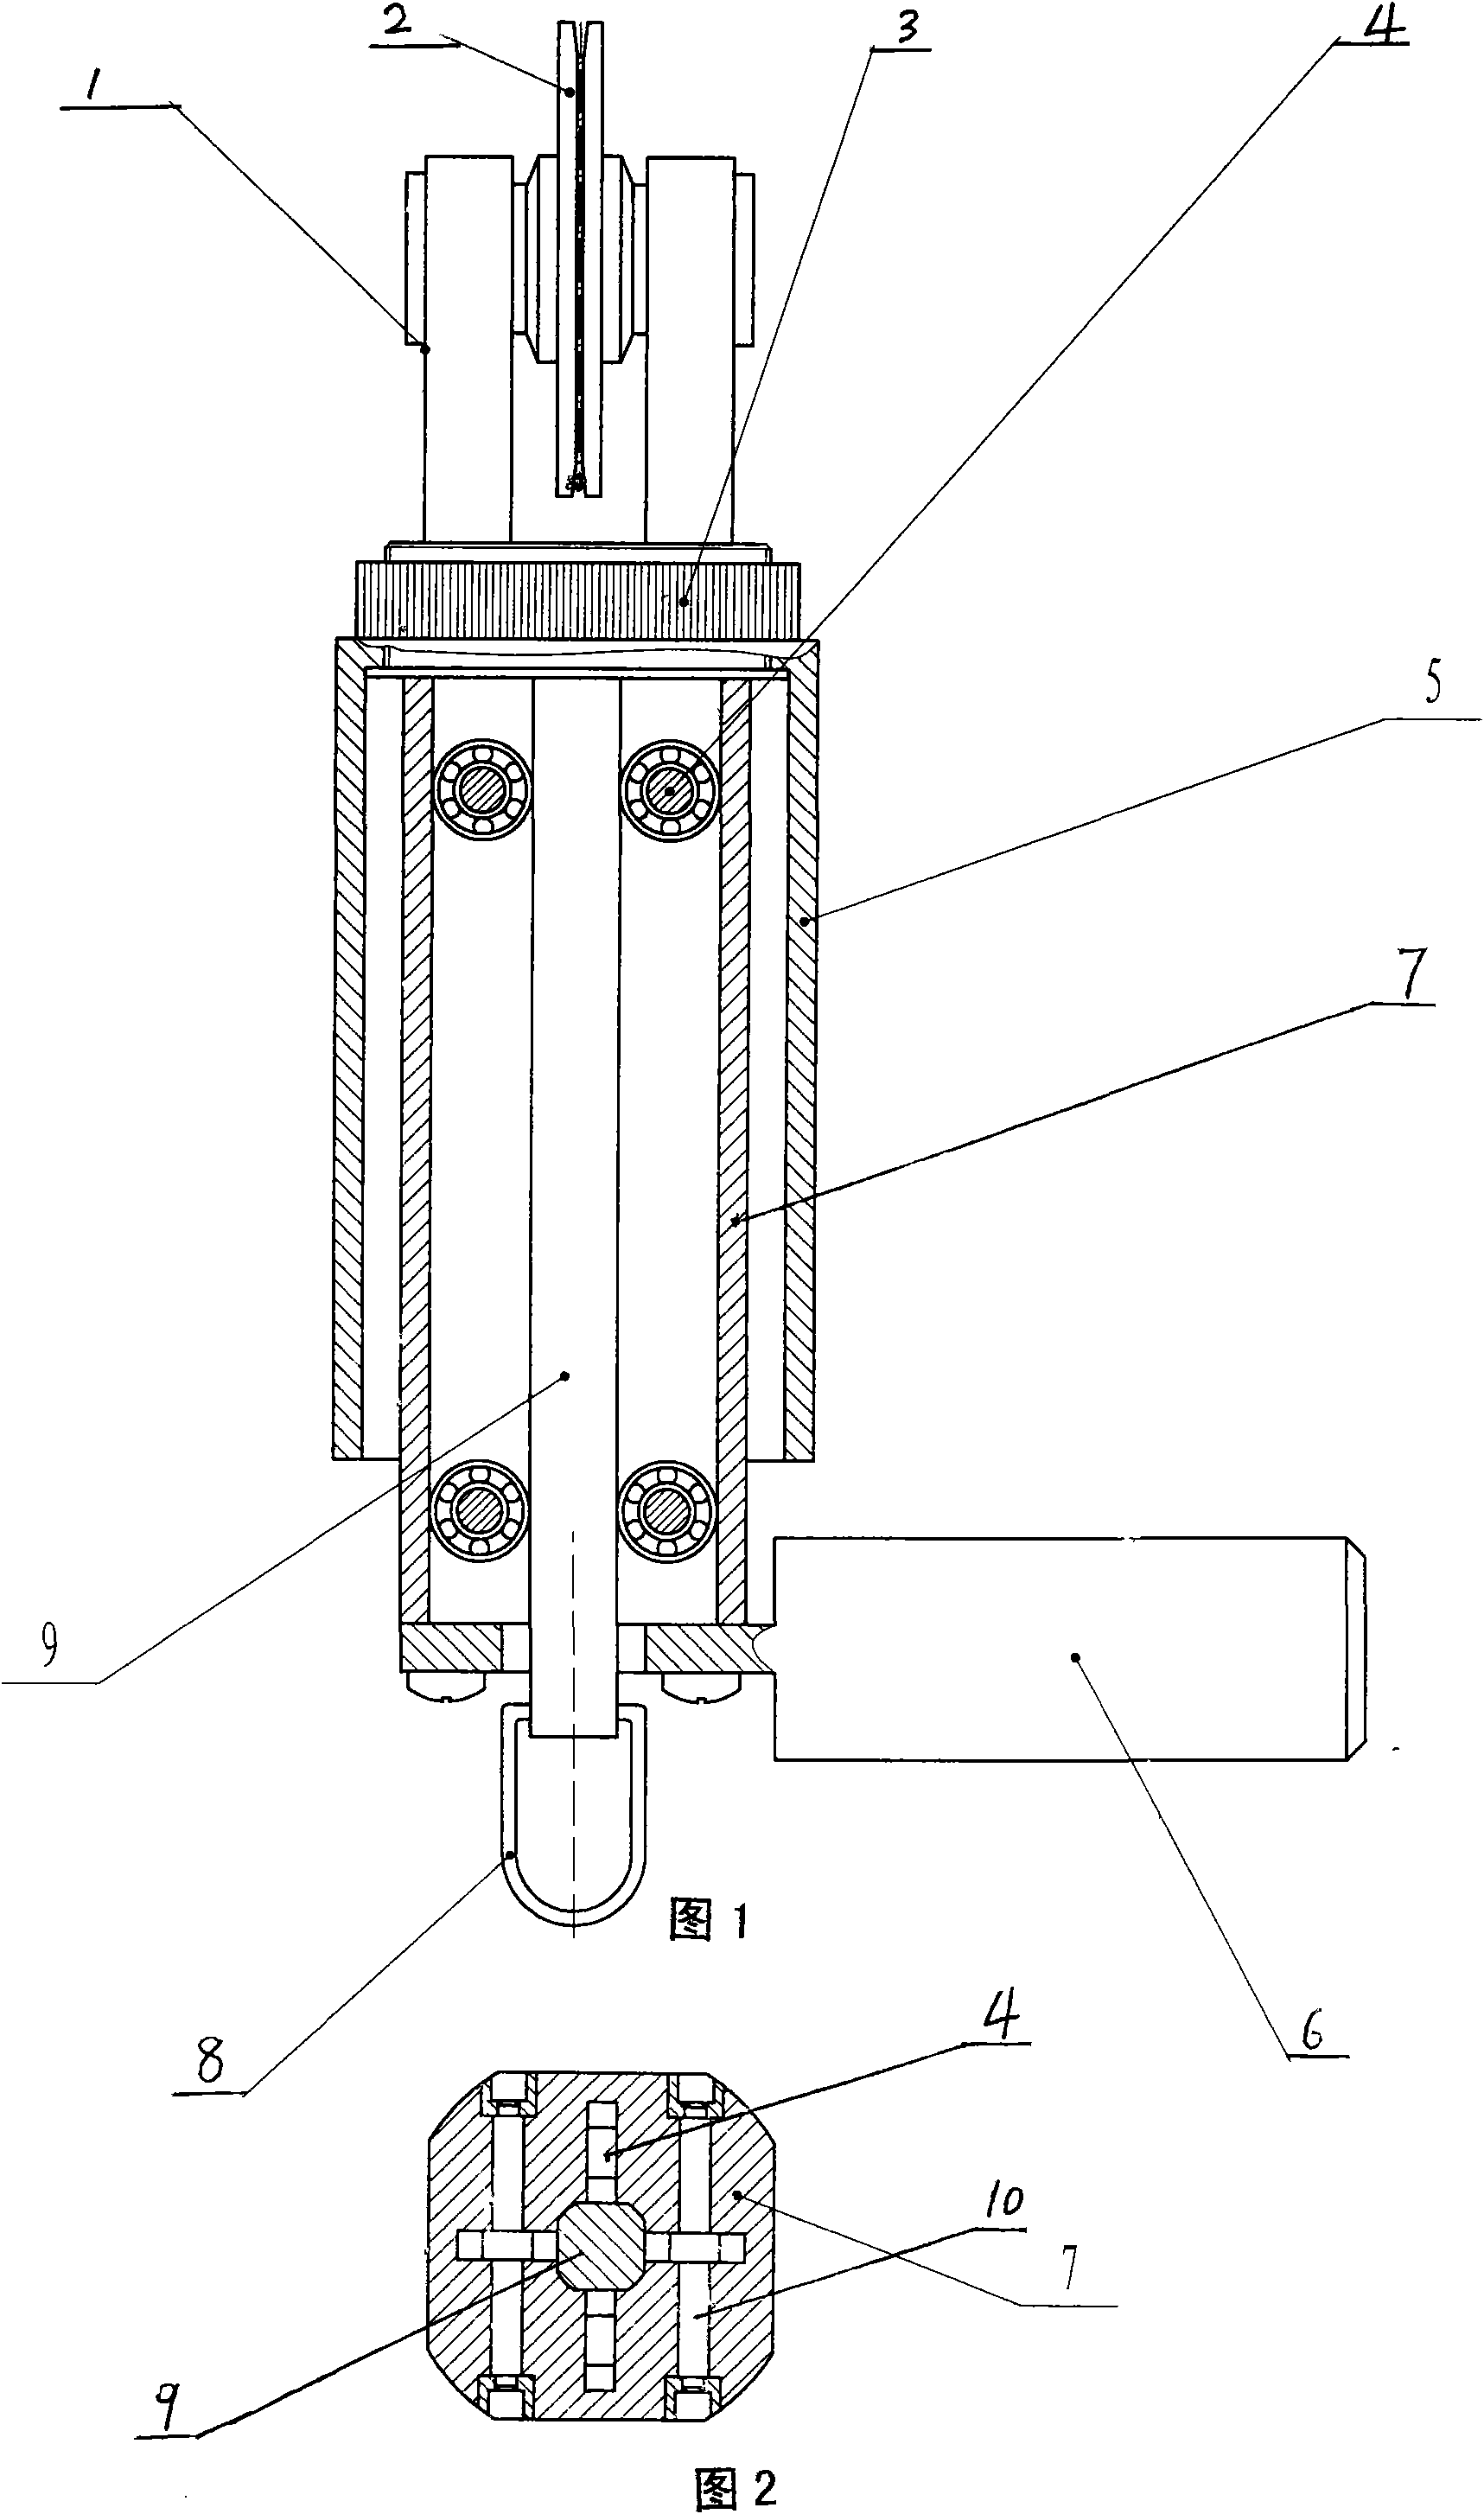 Molybdenum wire balancer for numerically controlled wire-cut electric discharge machine